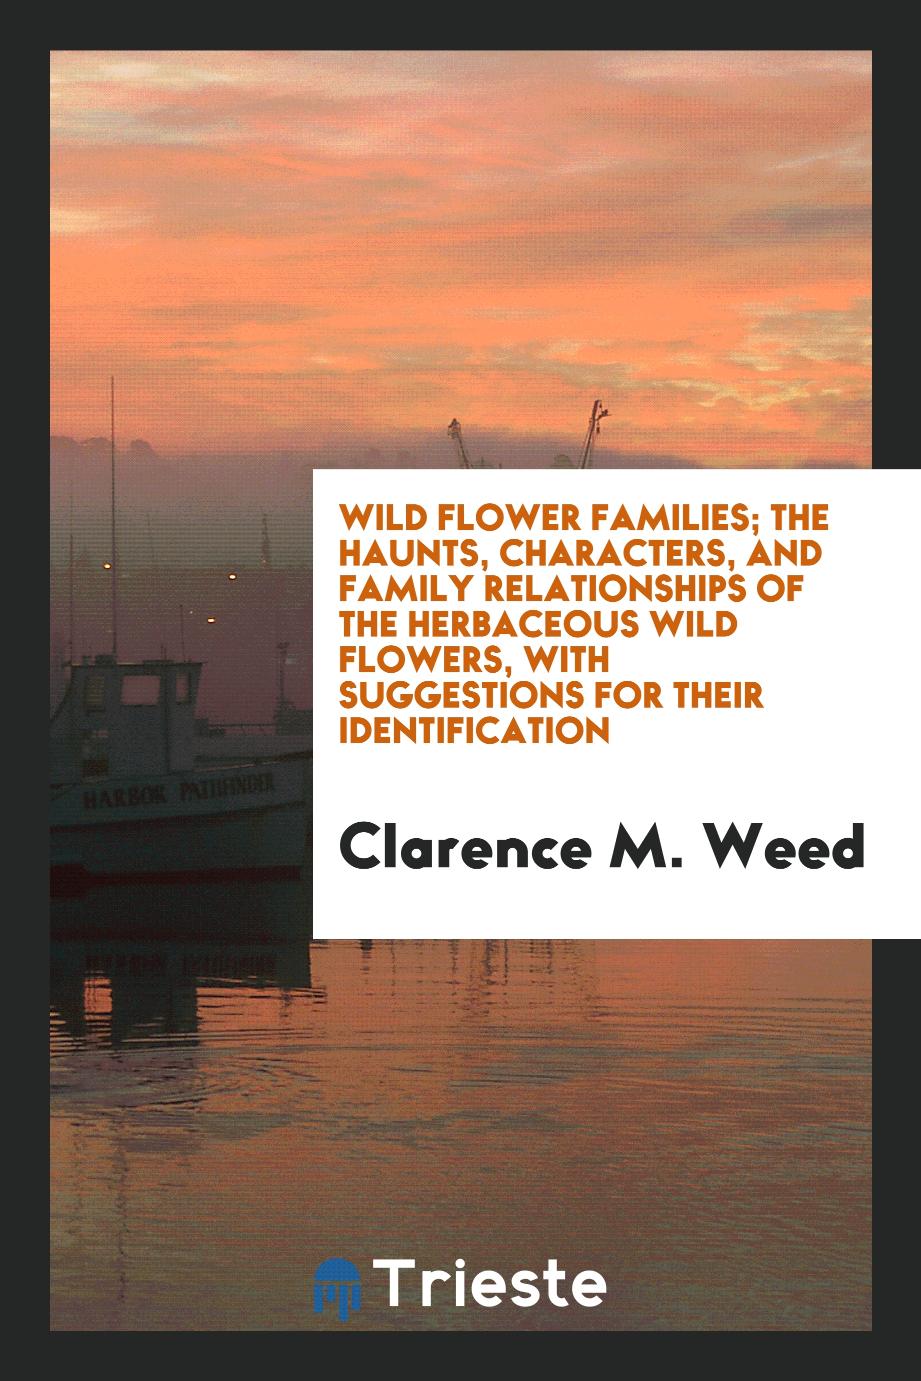 Wild flower families; the haunts, characters, and family relationships of the herbaceous wild flowers, with suggestions for their identification